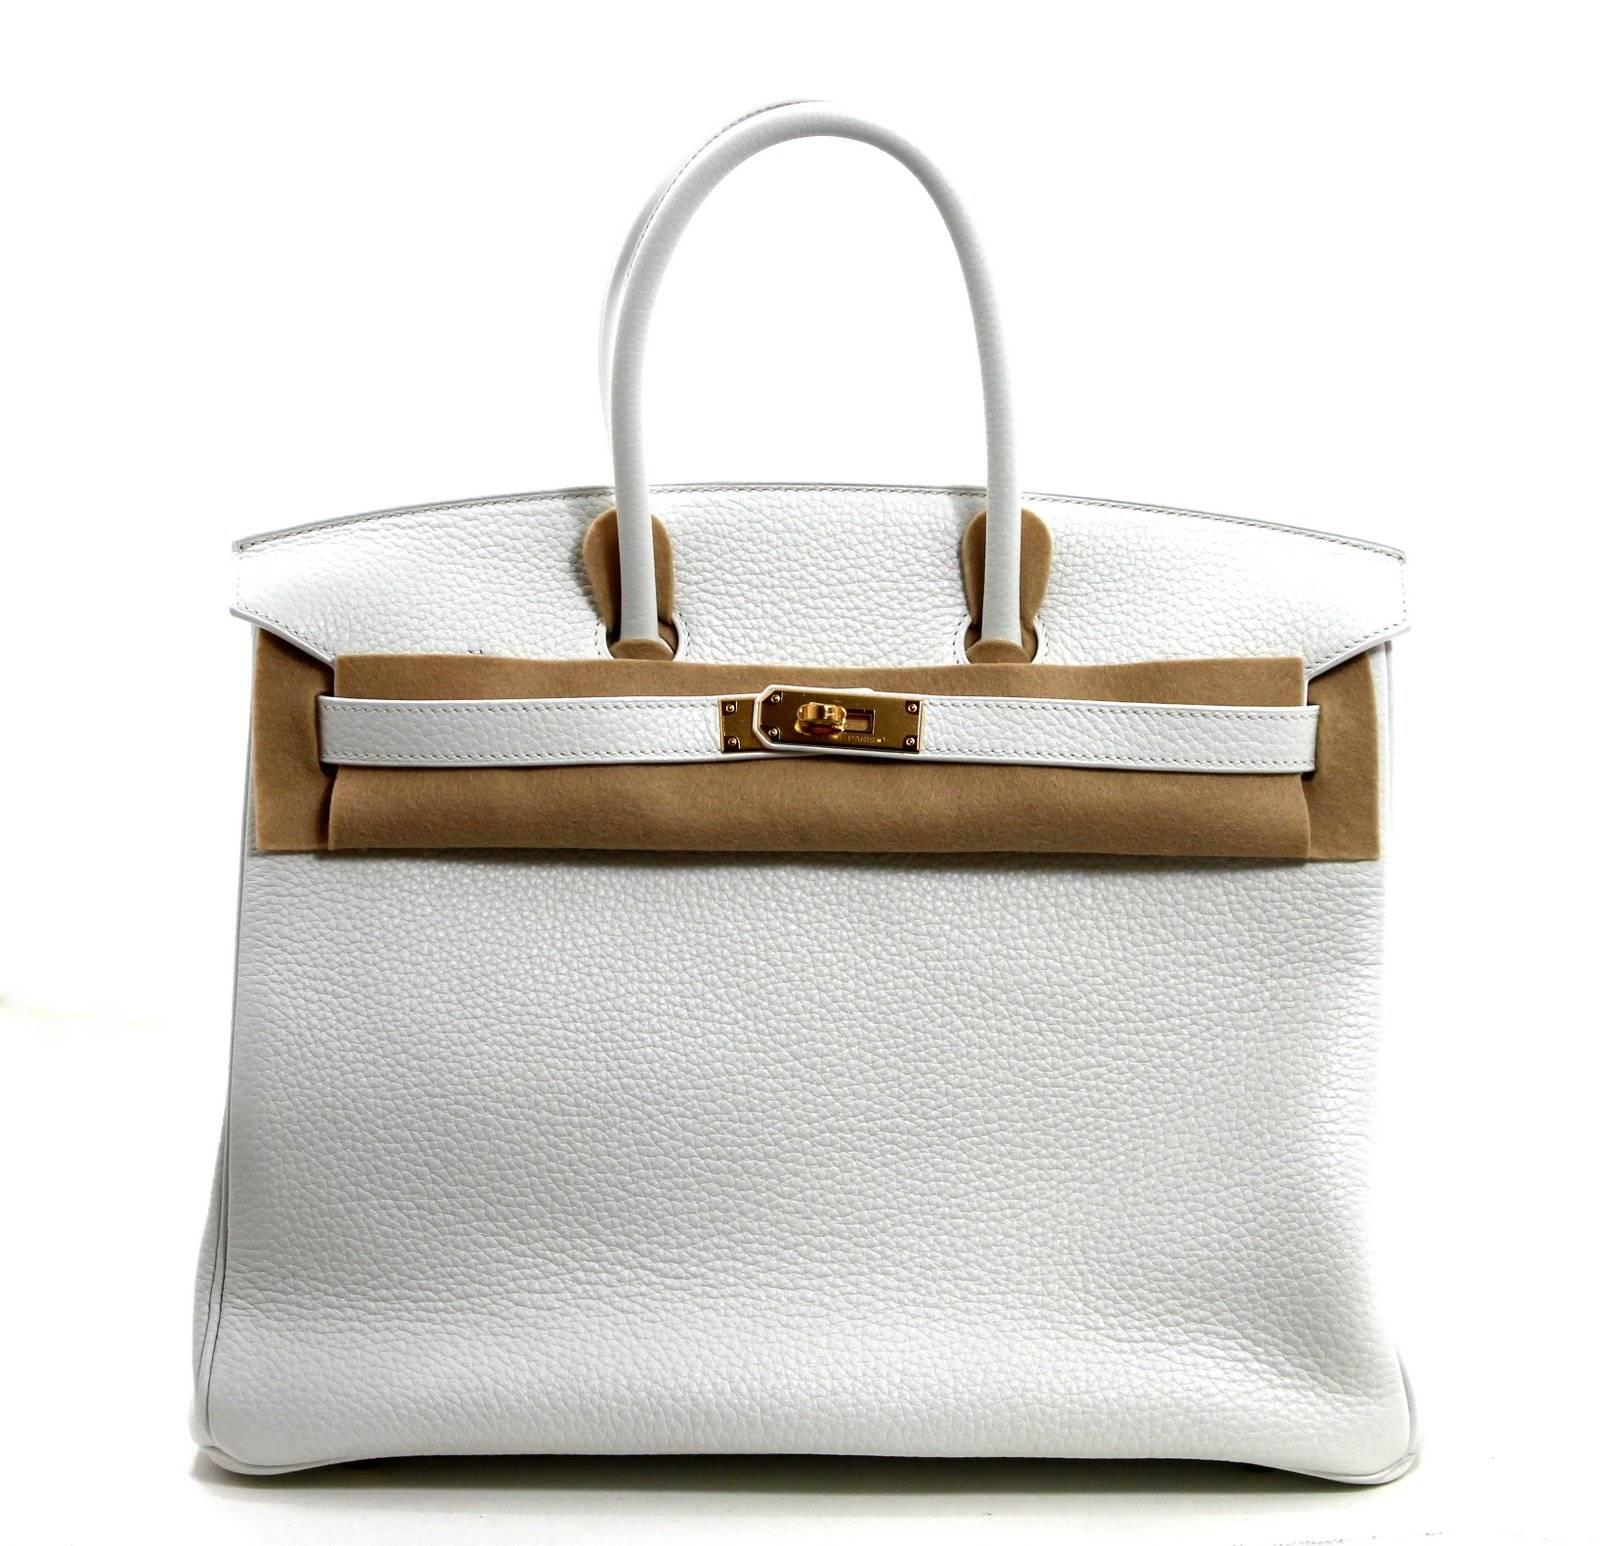 Hermès WHITE Clemence Birkin Bag- 35 cm with GHW, T stamp For Sale 3